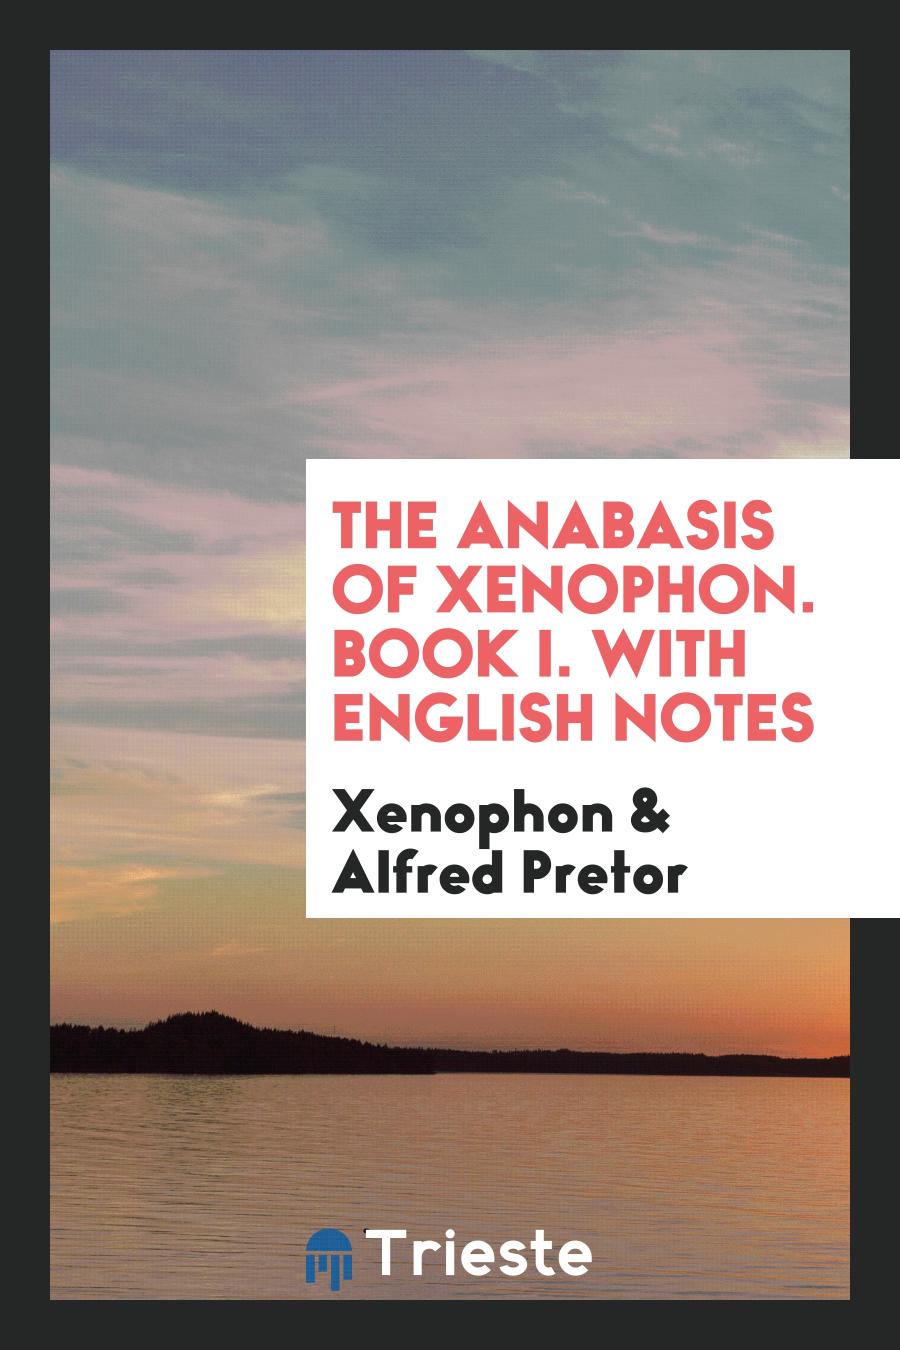 The Anabasis of Xenophon. Book I. With English Notes